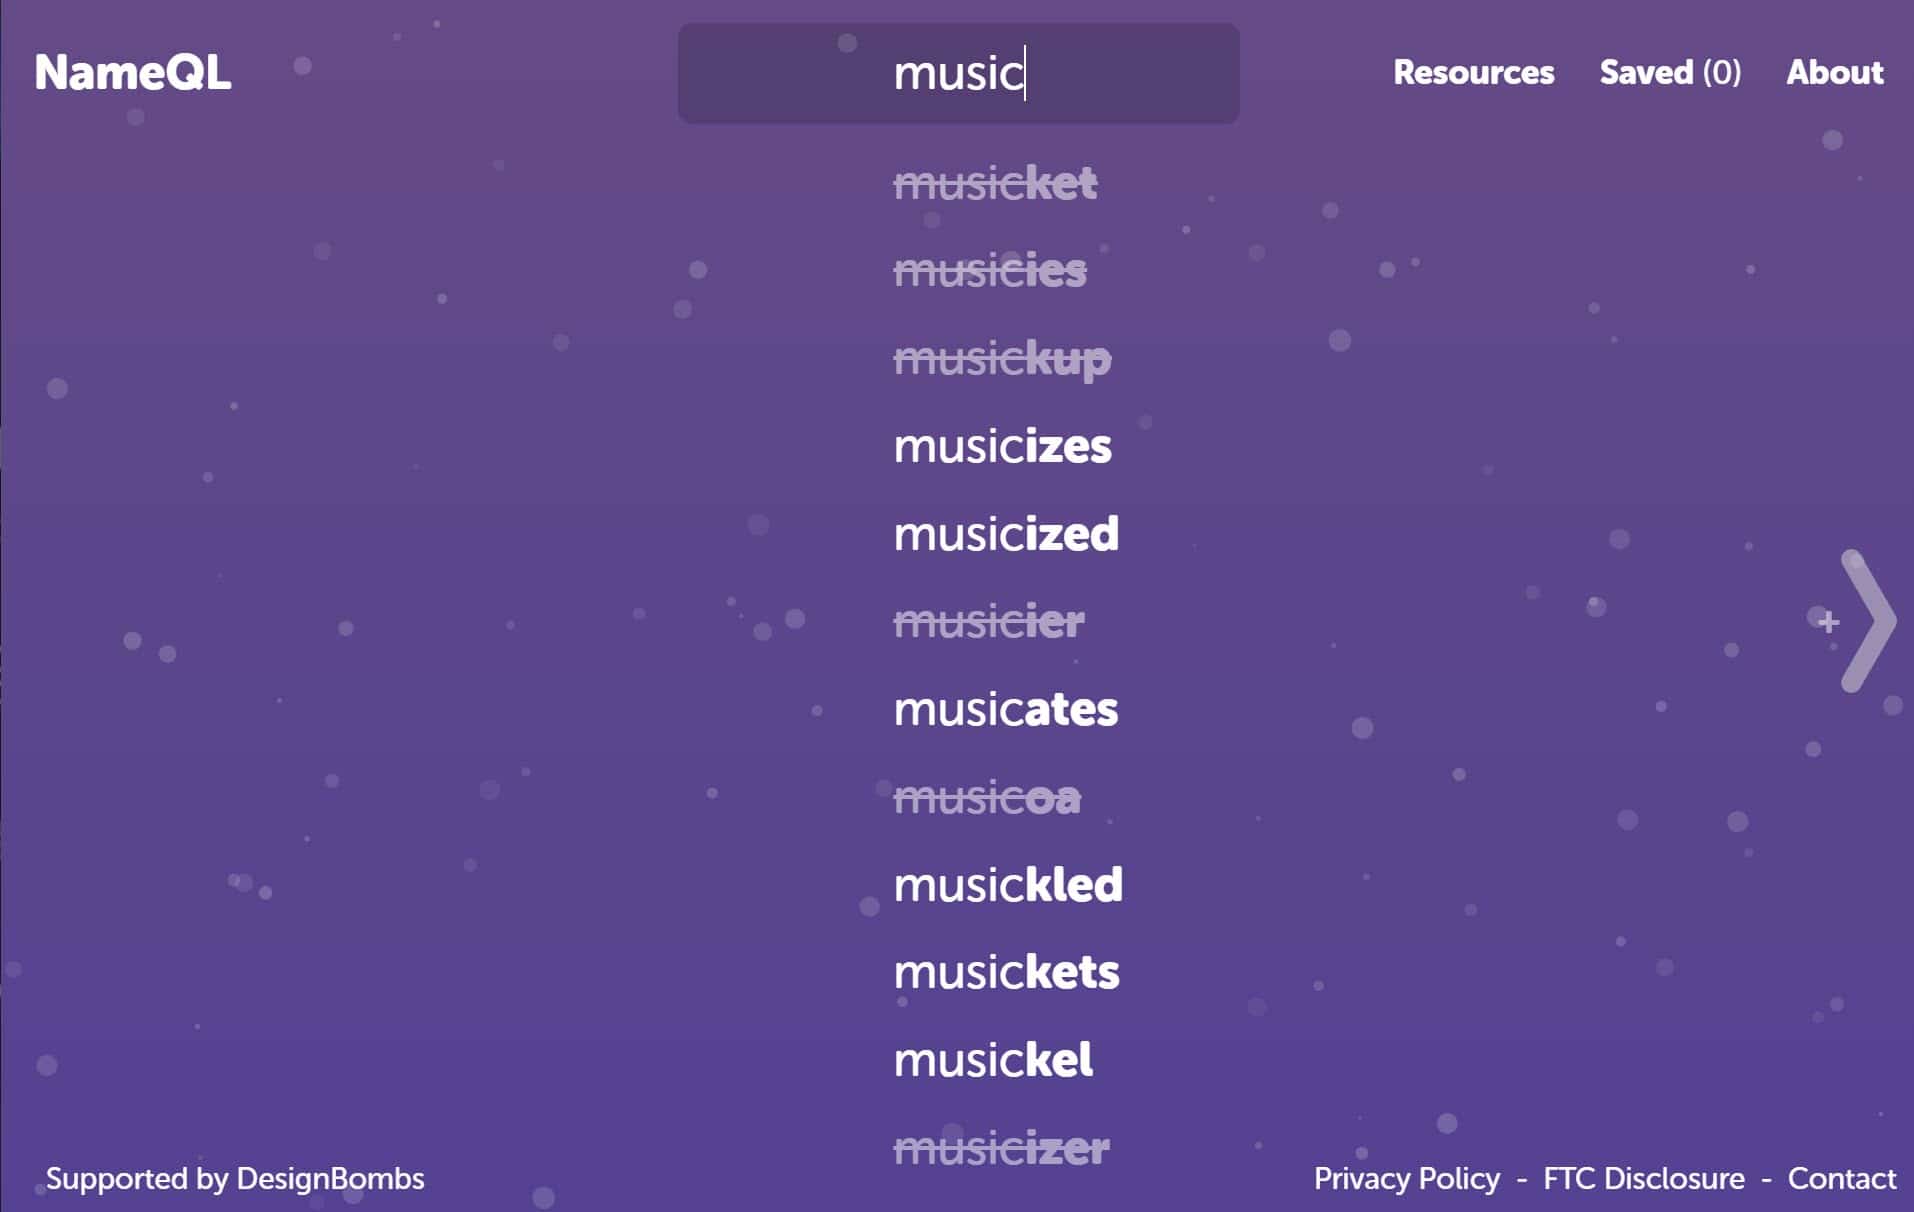 A search for the word "music" and the results show on the NameQL homepage.